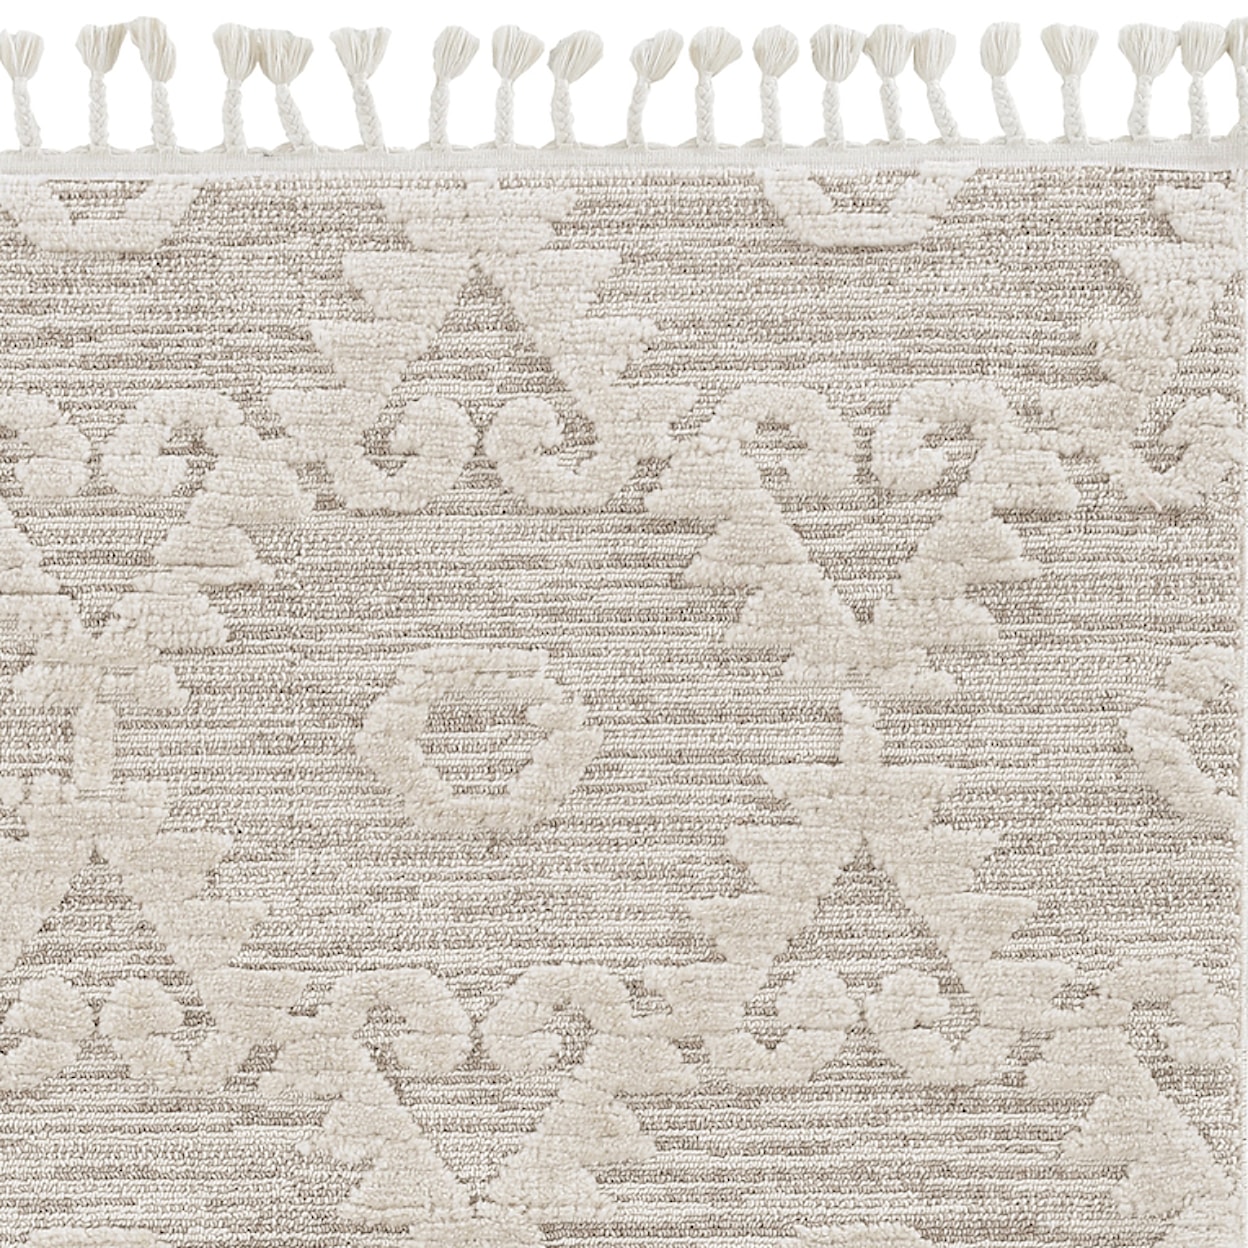 Kas Willow 2'2" x 7'6" Rug